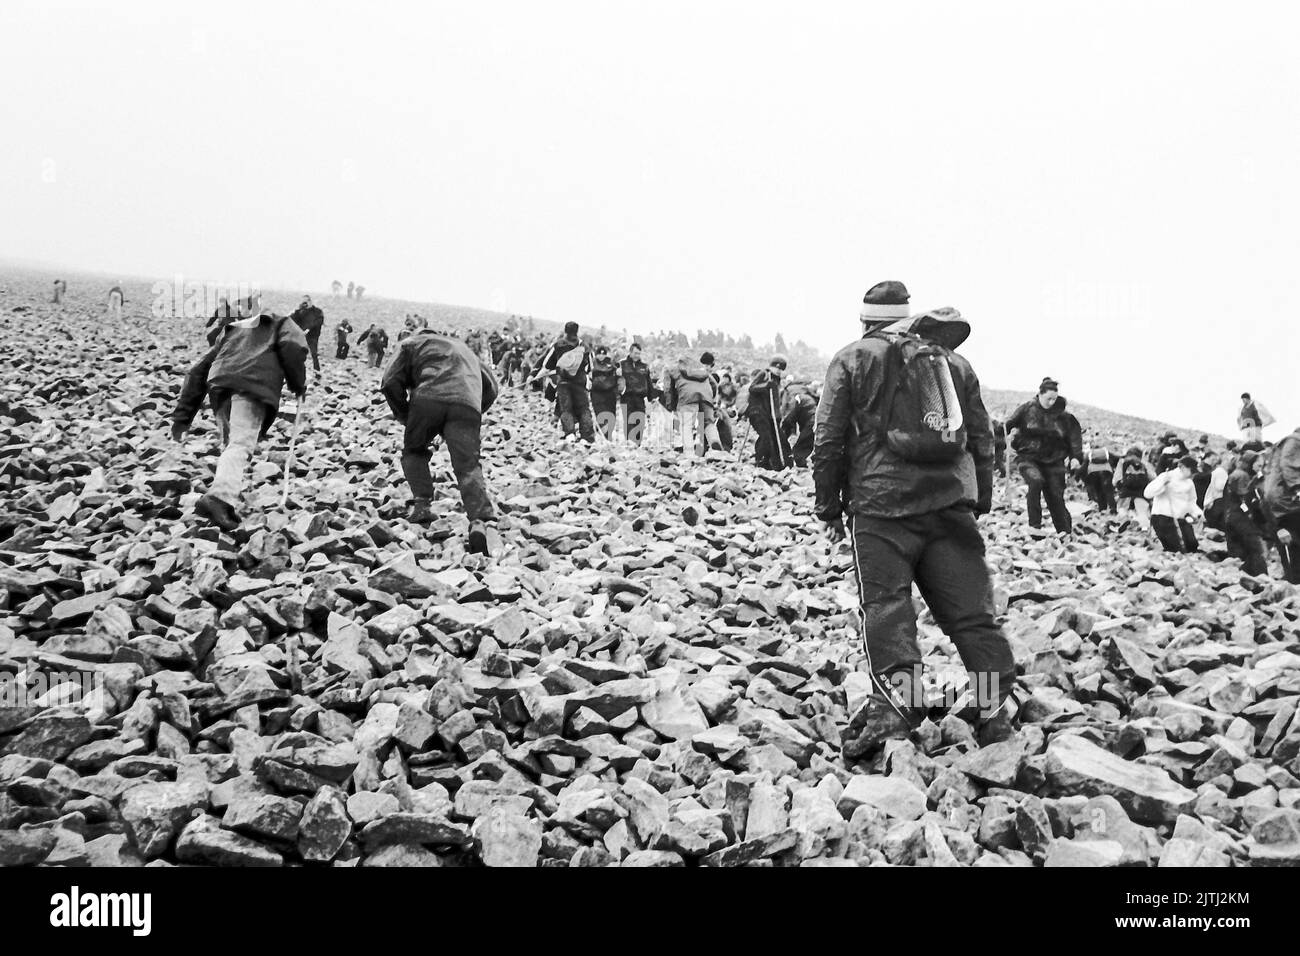 Black and white film footage of 'Reek Sunday', a guelling pilgrimage up Croagh Patrick, County Mayo on the last Sunday in July each year, to visit the location where Saint Patrick stayed for 40 days, and from where his was said to have banished the lizards and snakes from Ireland. Stock Photo